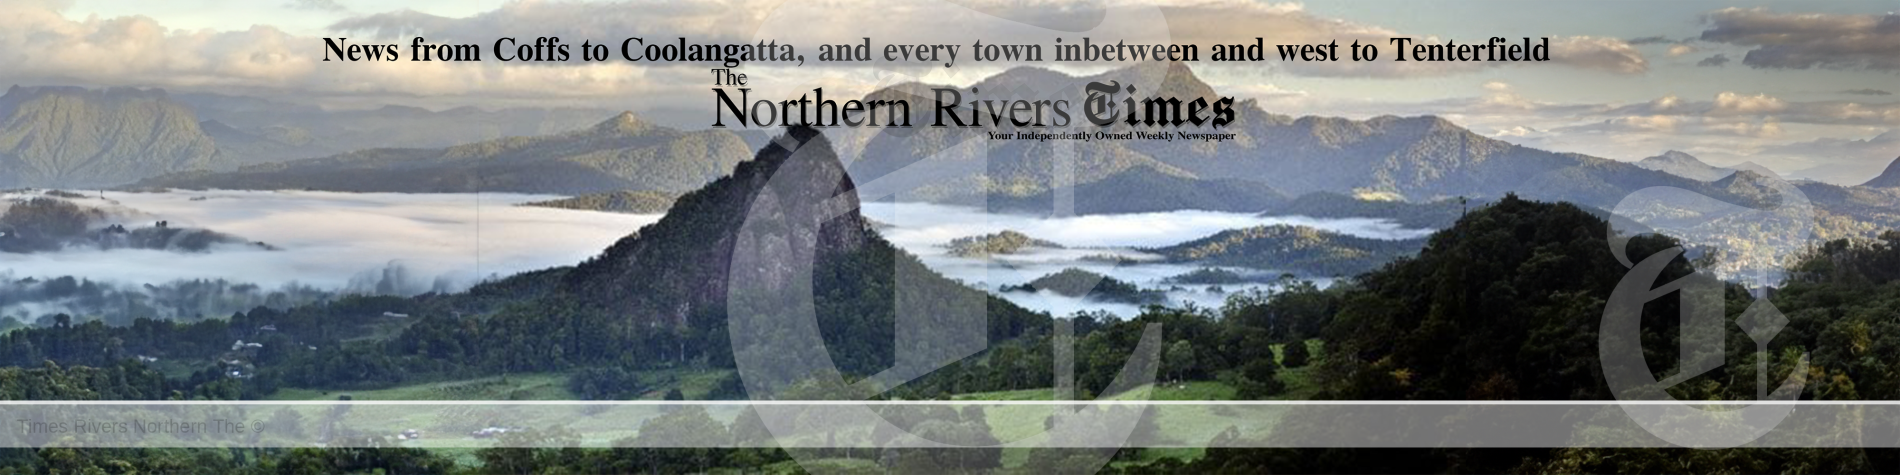 Mt Warning News and Weather copy